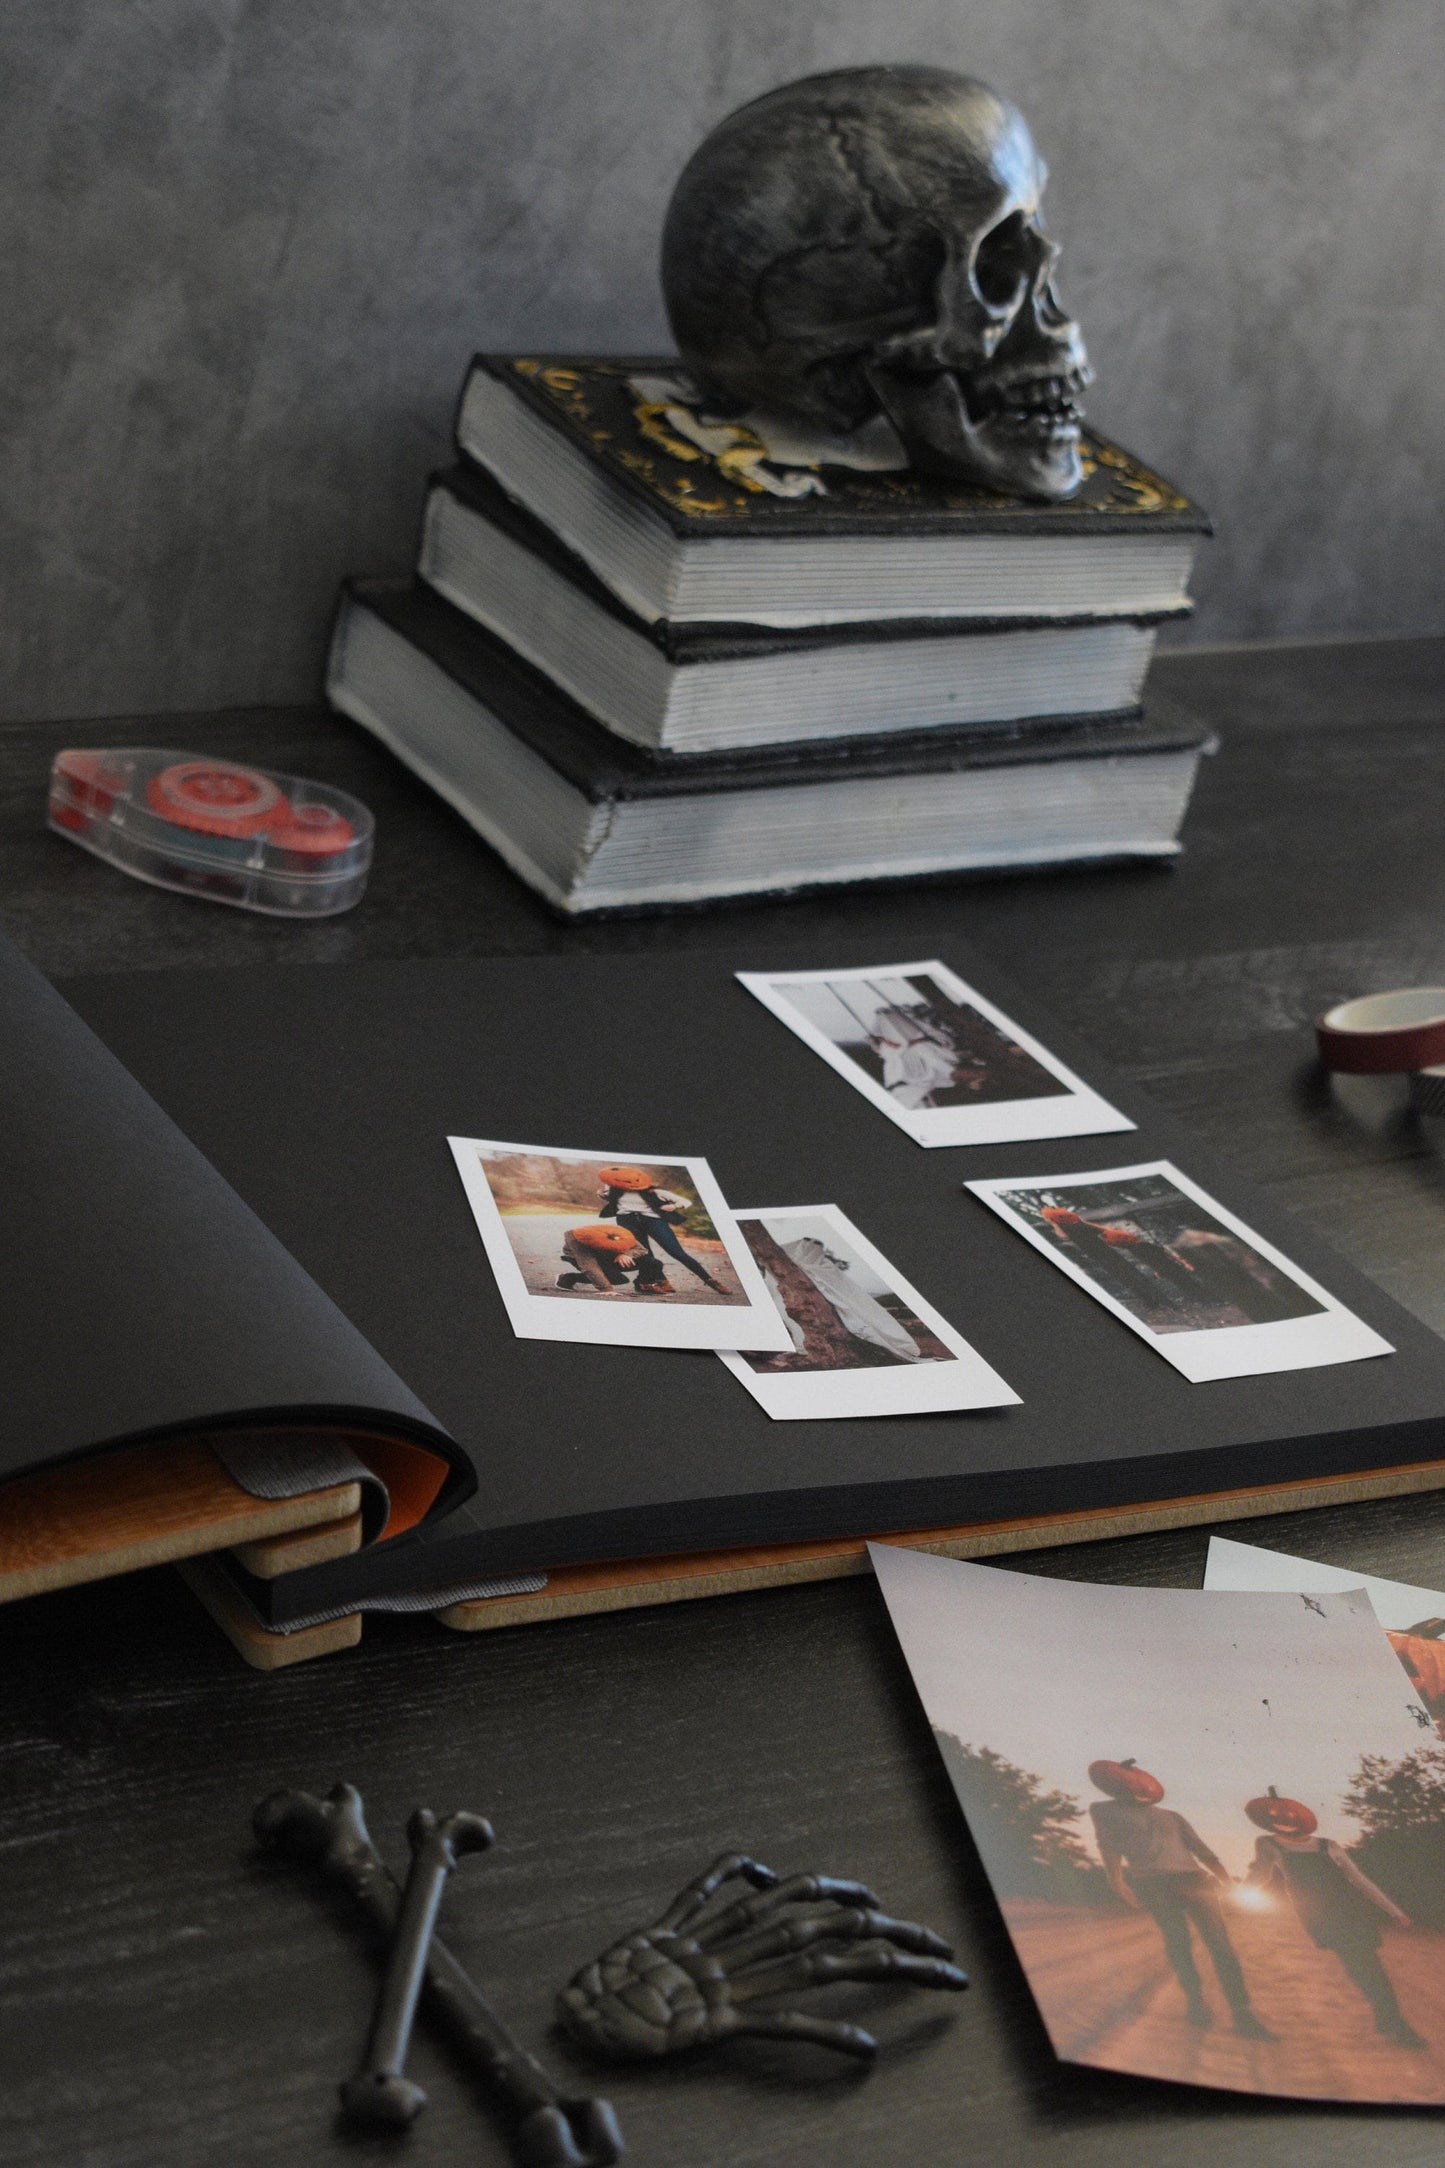 An 8.5x11" guest book lies open on a table with black cardstock pages. Polaroid pictures lay on top of the pages wth halloween decor such as pumpkins and skeletons.